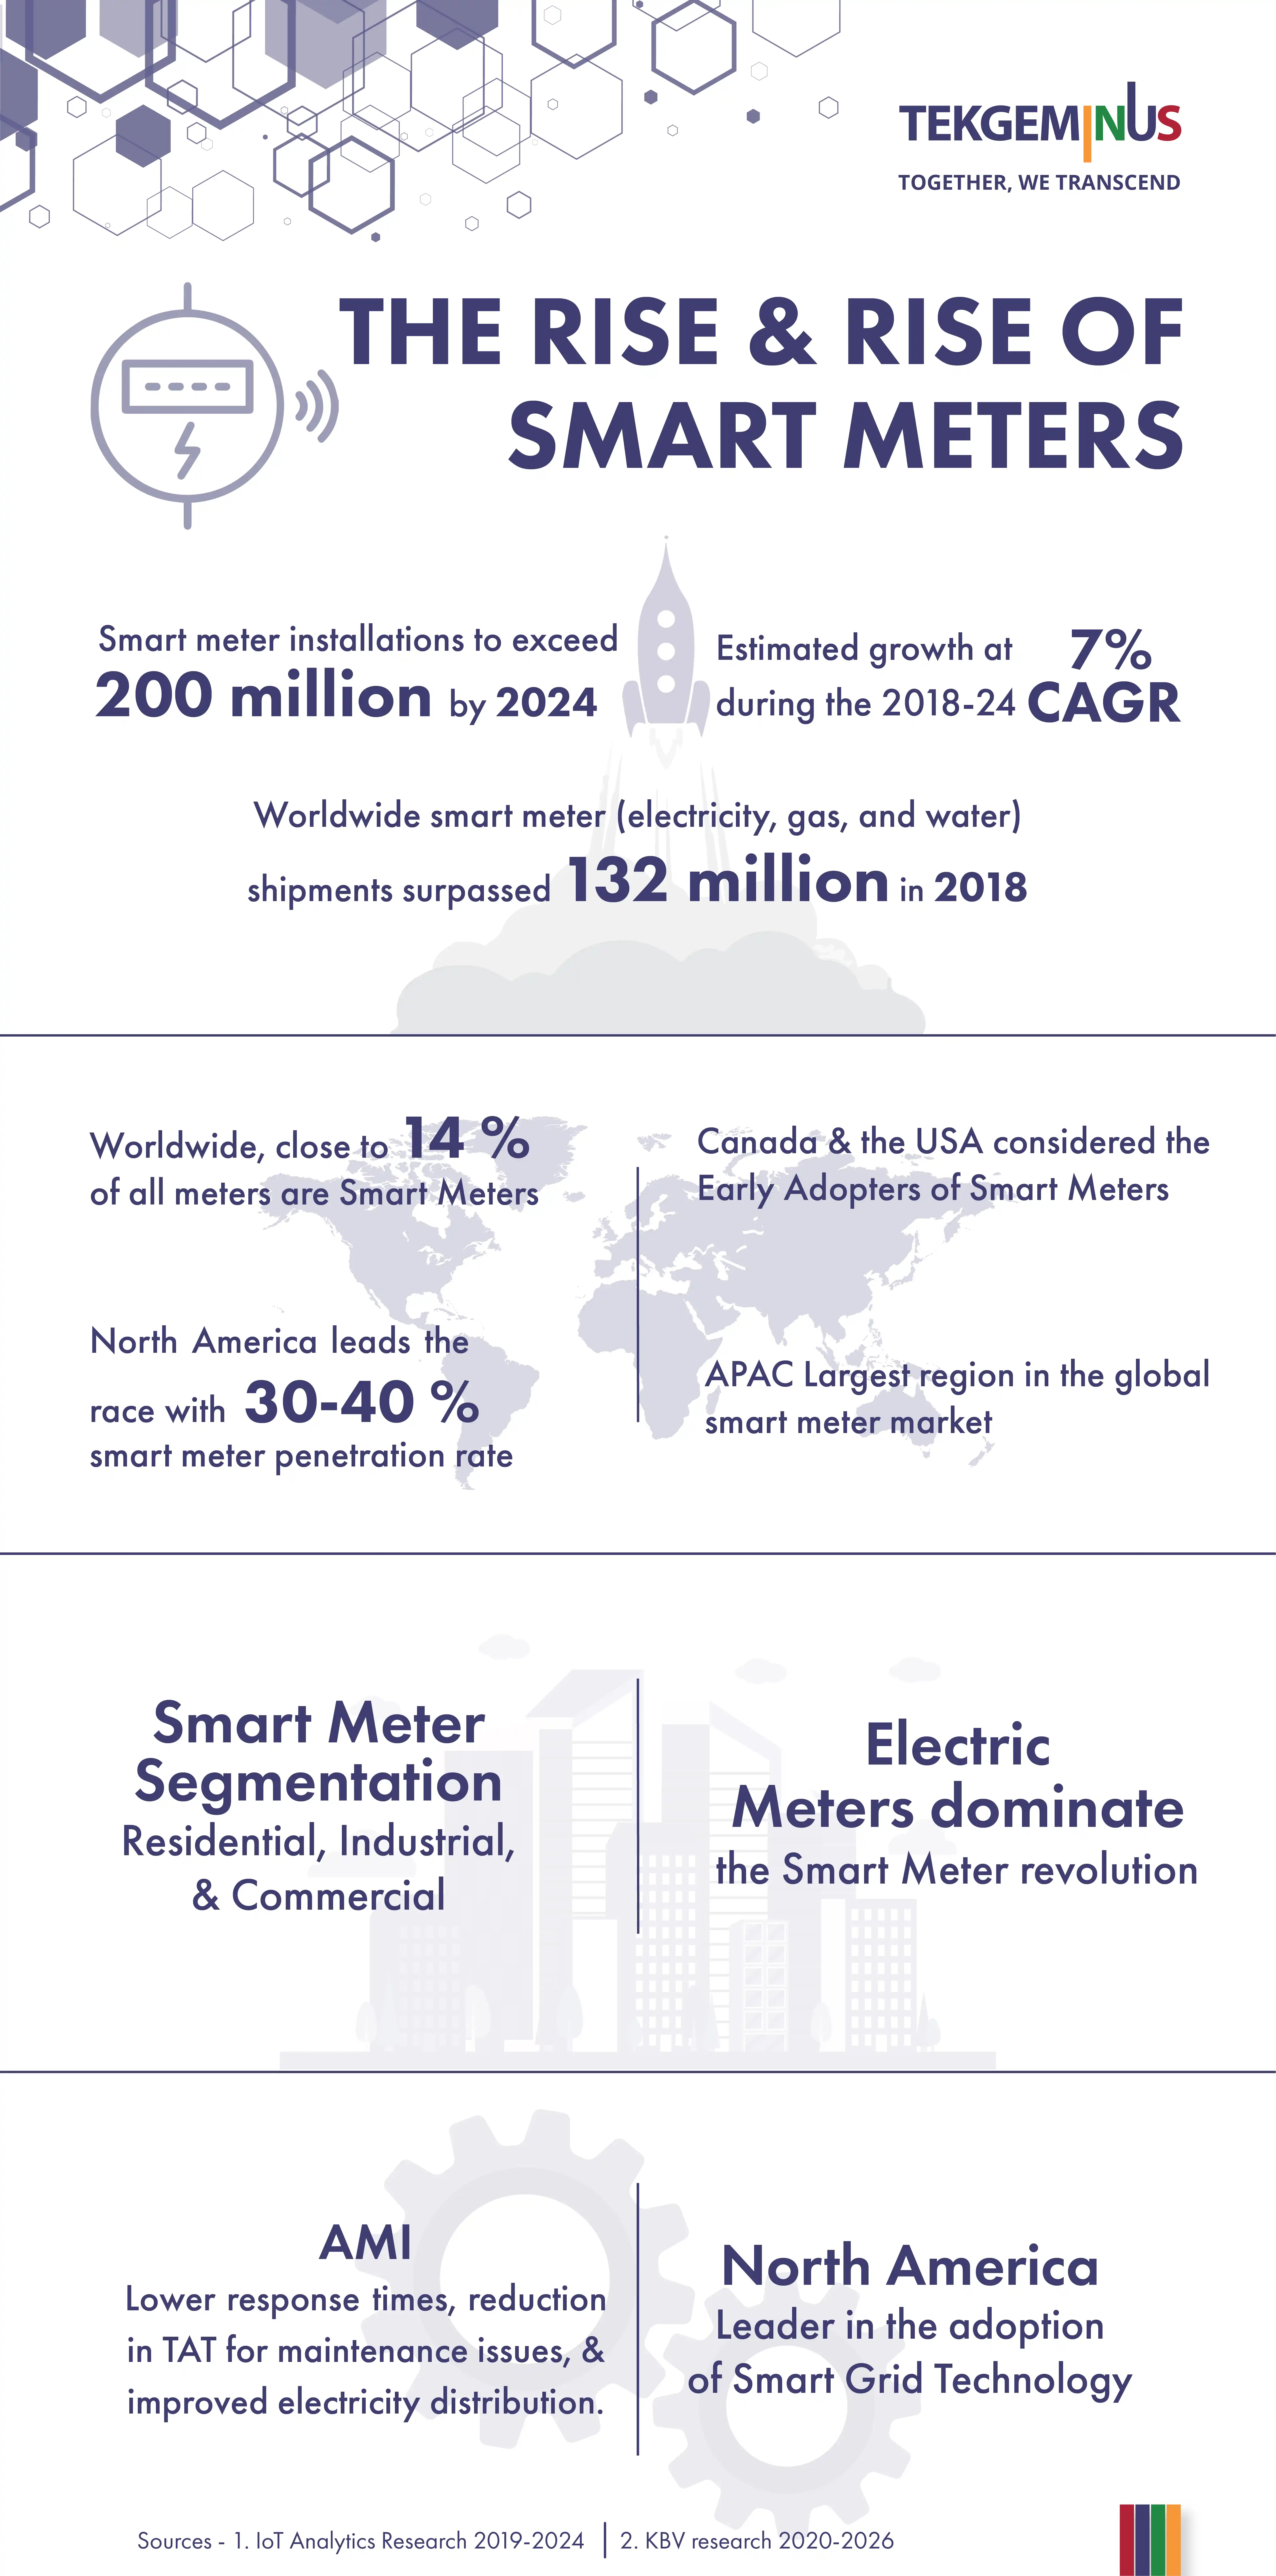 The Rise of Smart Meters